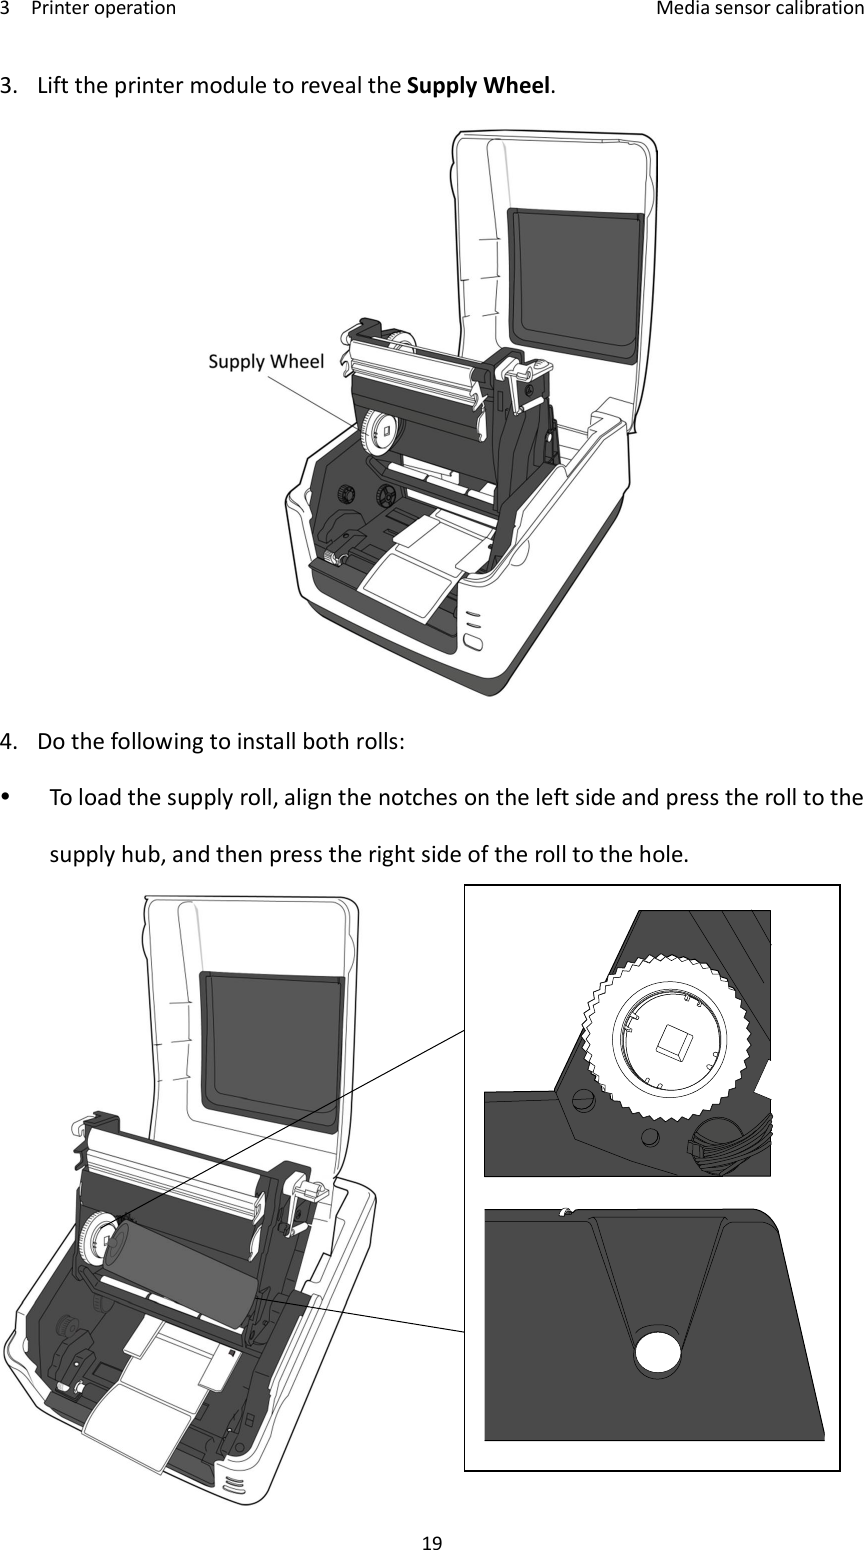 3    Printer operation    Media sensor calibration 19 3. Lift the printer module to reveal the Supply Wheel.  4. Do the following to install both rolls:  To load the supply roll, align the notches on the left side and press the roll to the supply hub, and then press the right side of the roll to the hole.    